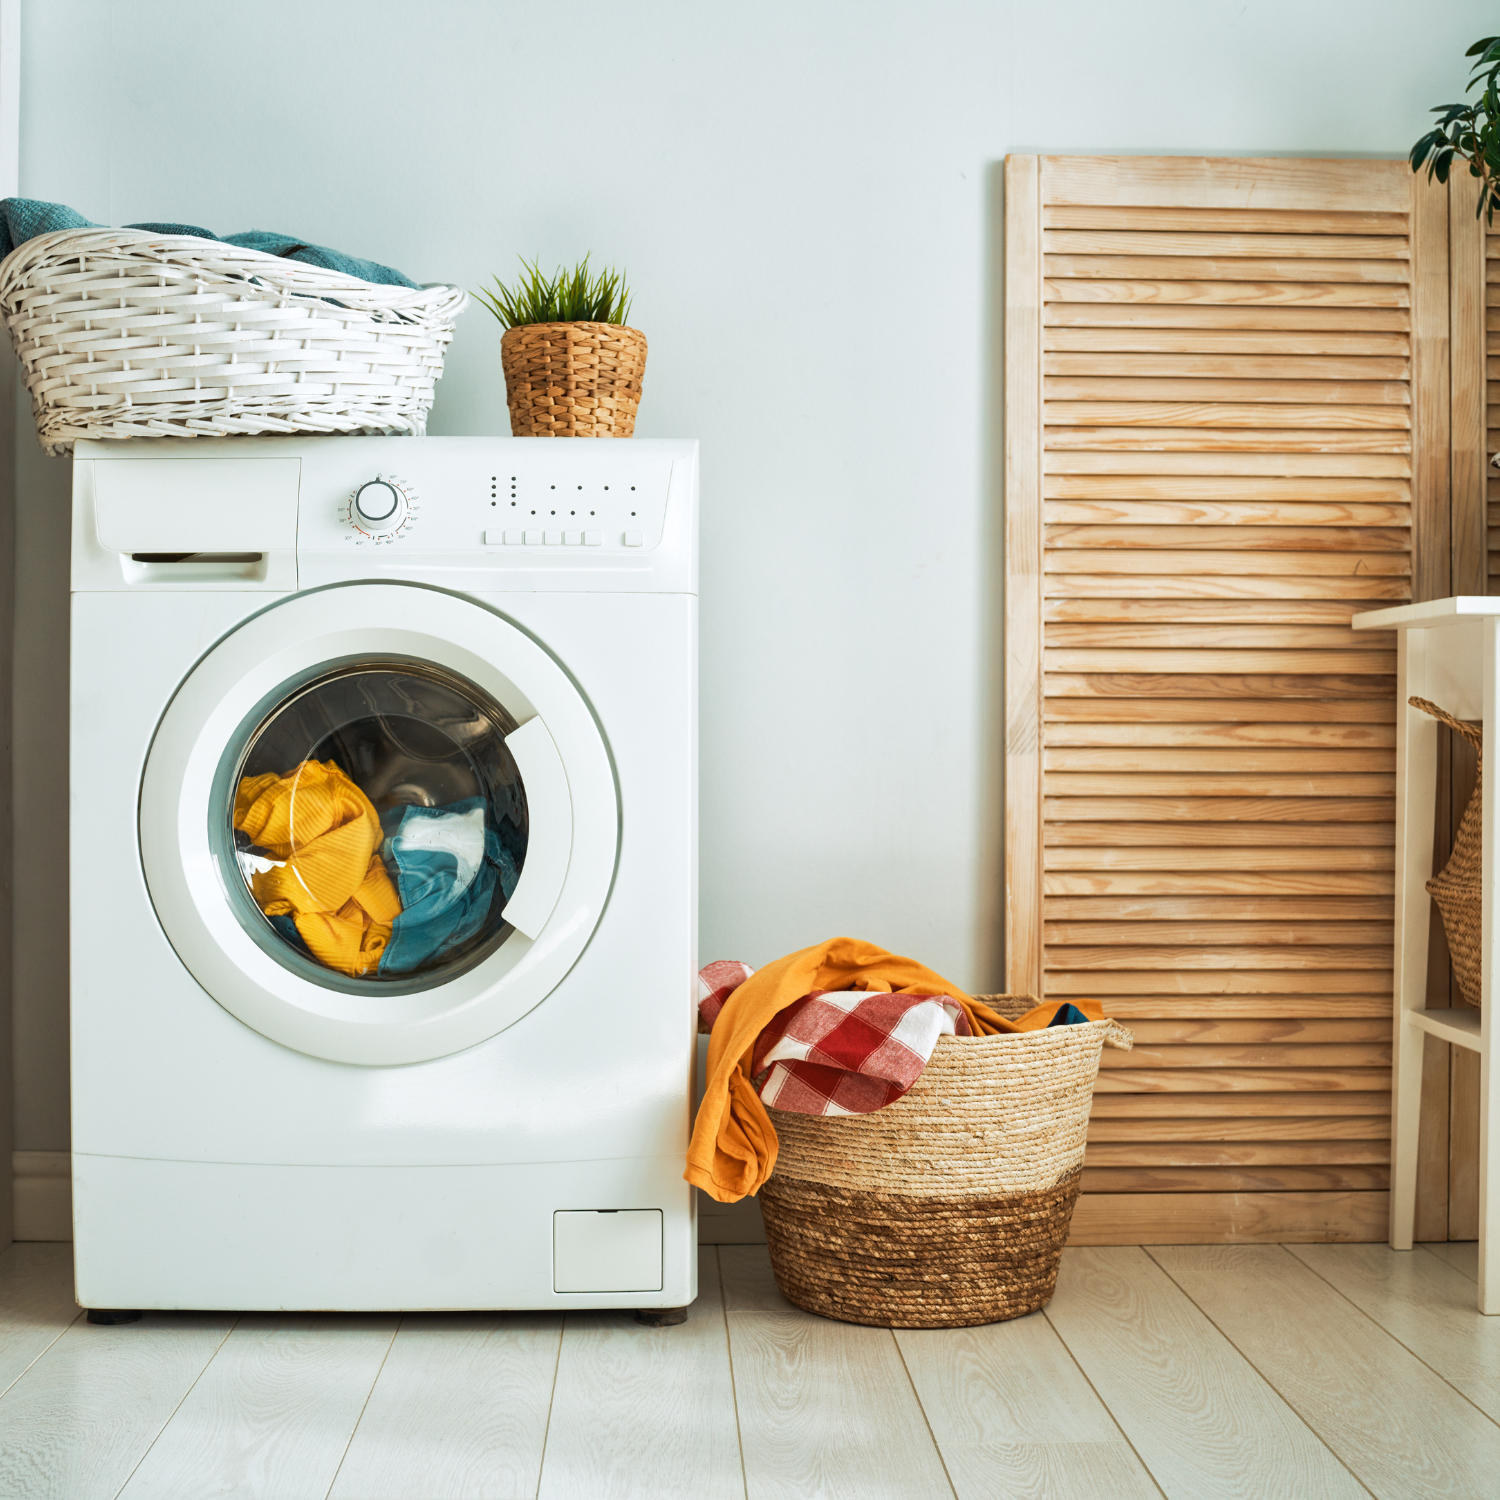 Pile of baby clothes and moses dressings next to a washing machine | Parenting tips and advice - Clair de Lune UK